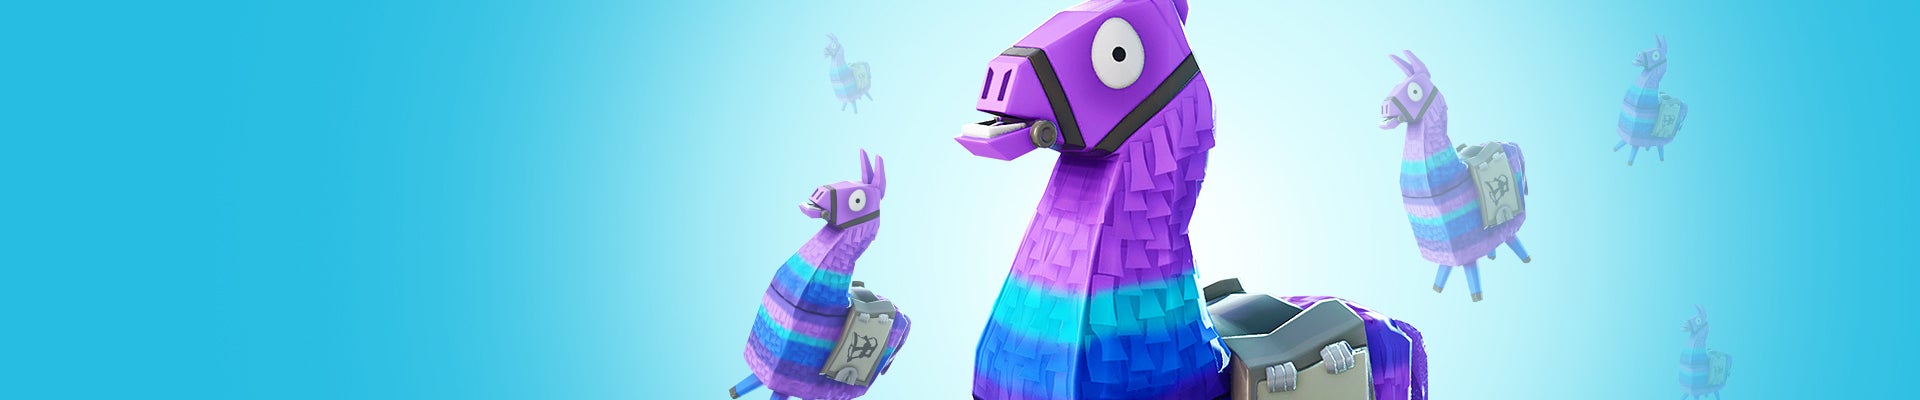 Image for Fortnite: Where to find a Supply Llama